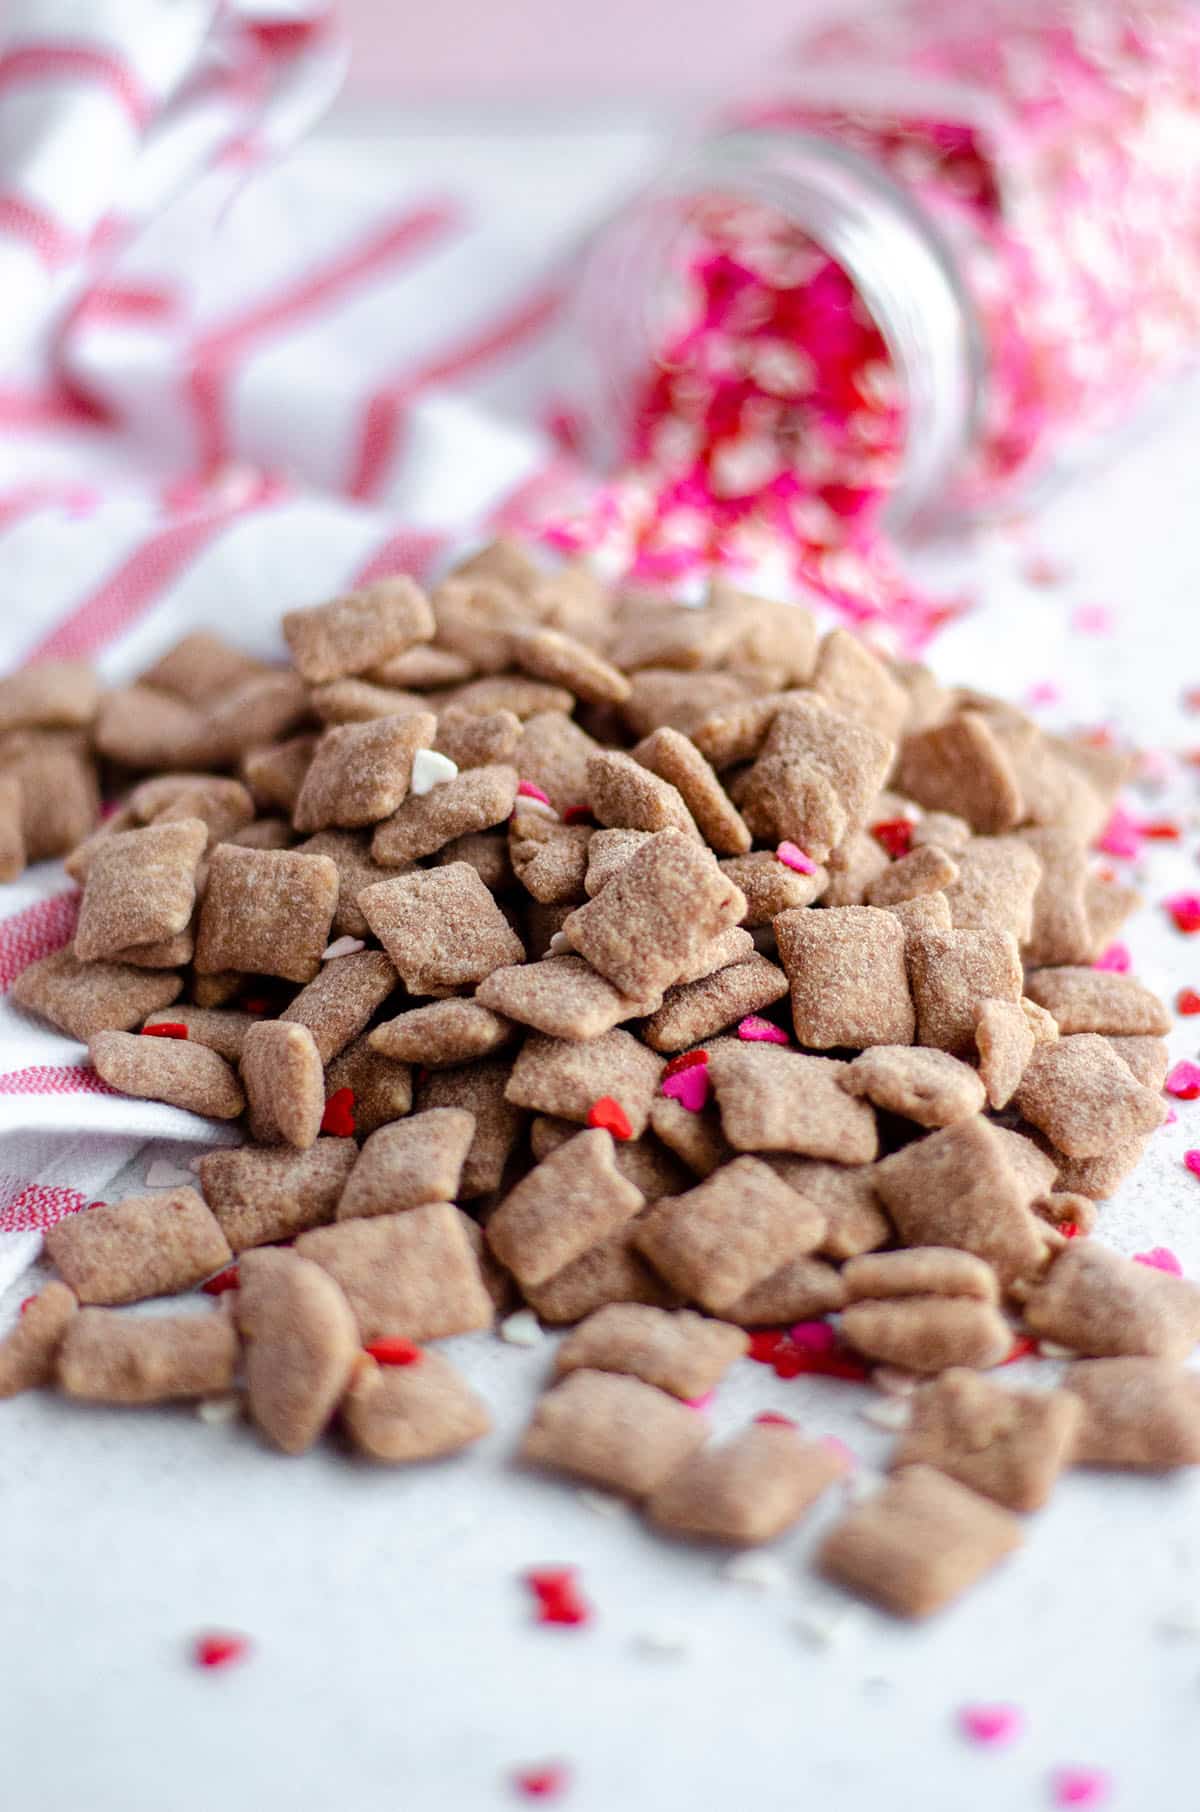 Classic puppy chow cereal snack mix gets a red velvet makeover, flavored with white chocolate and red velvet cake mix. via @frshaprilflours